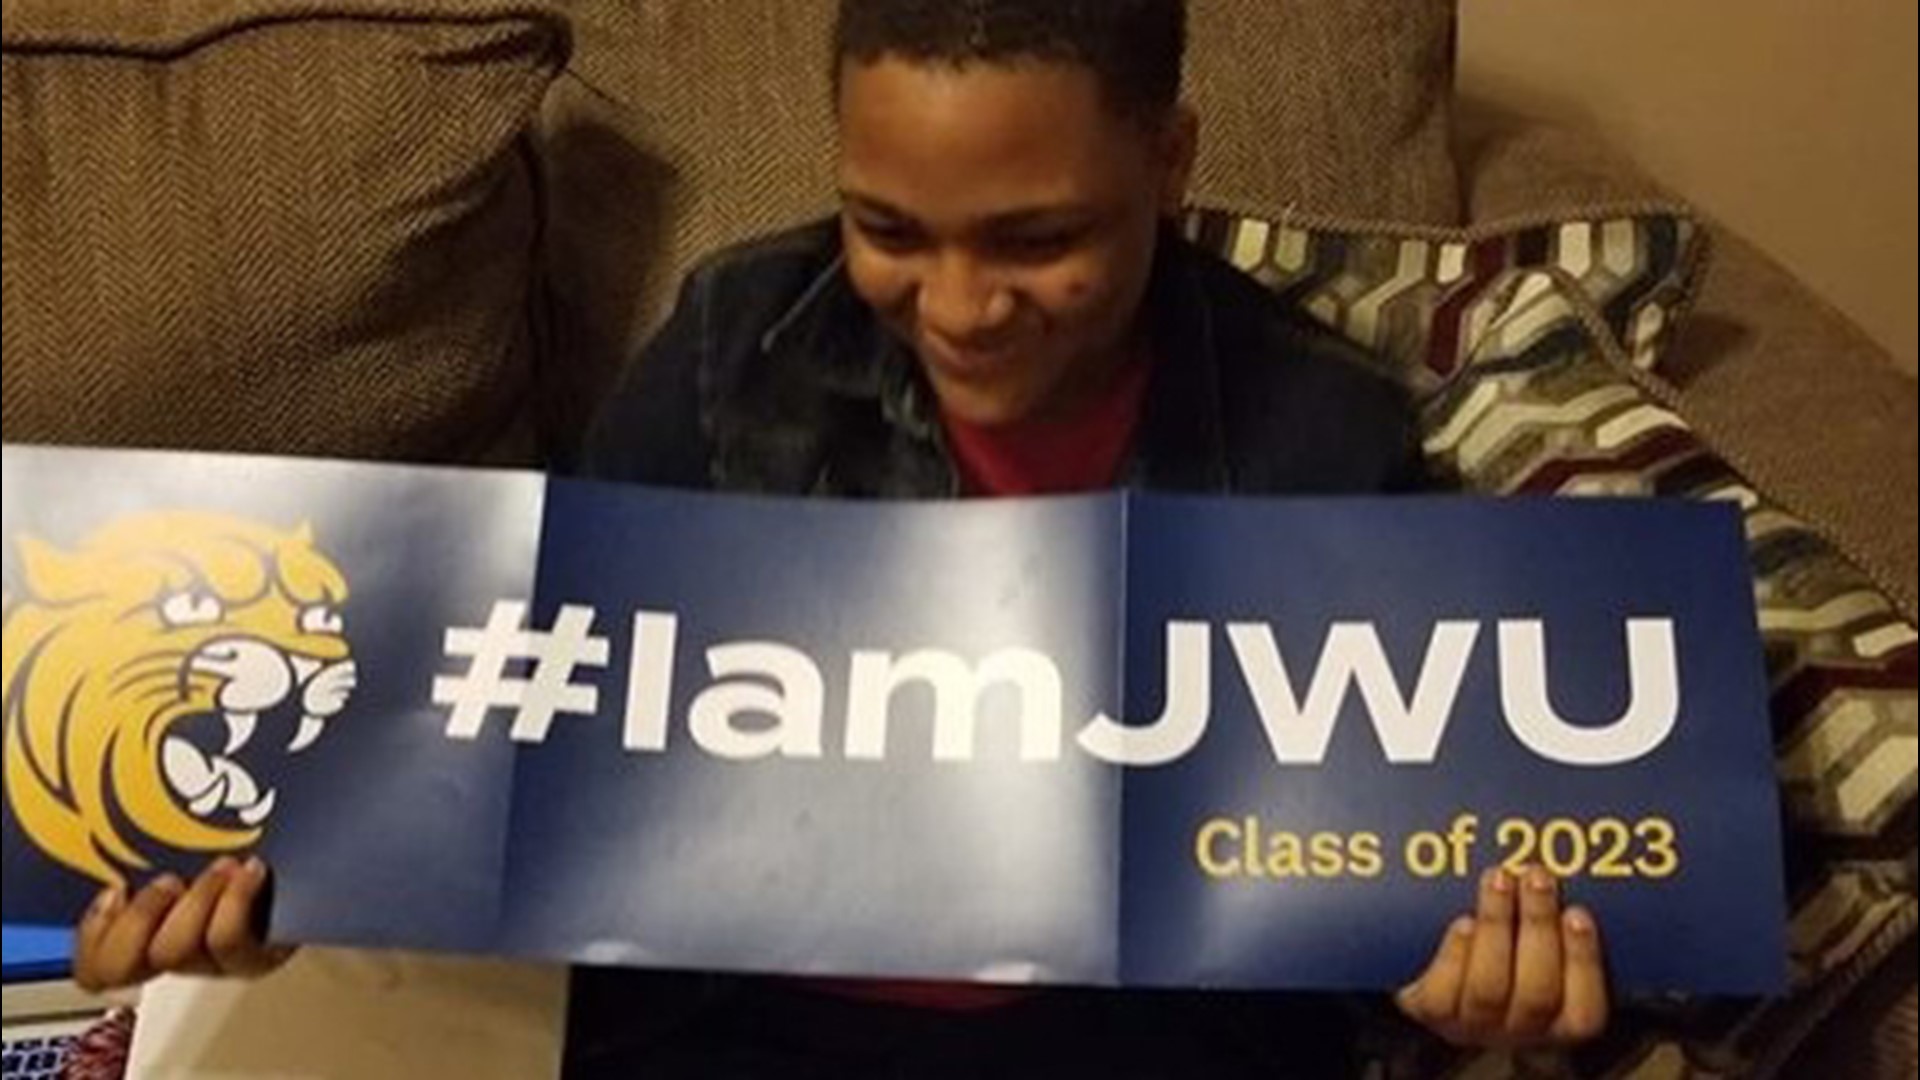 The 17-year-old from Covington has a lot to celebrate these days, after she received an acceptance letter from her dream culinary program at Johnson and Wales University